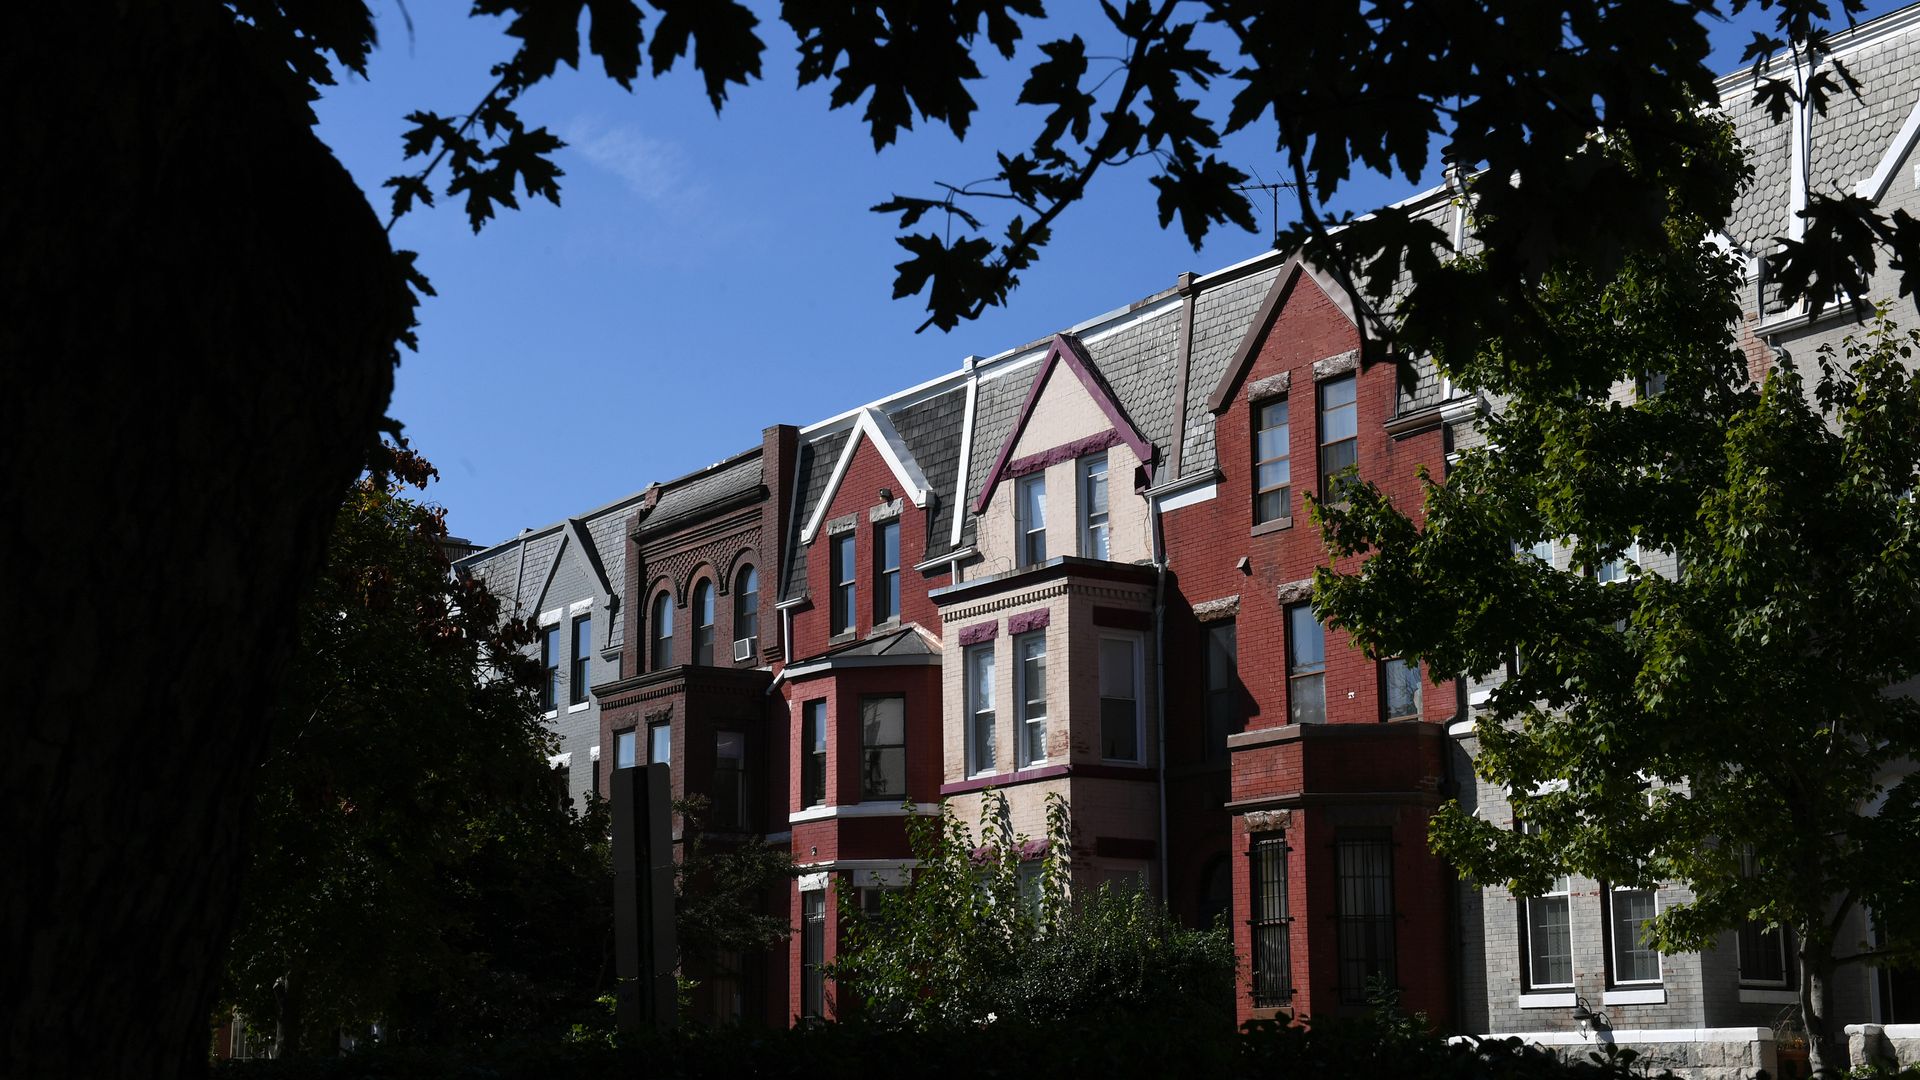 Row houses in Columbia Heights, D.C.